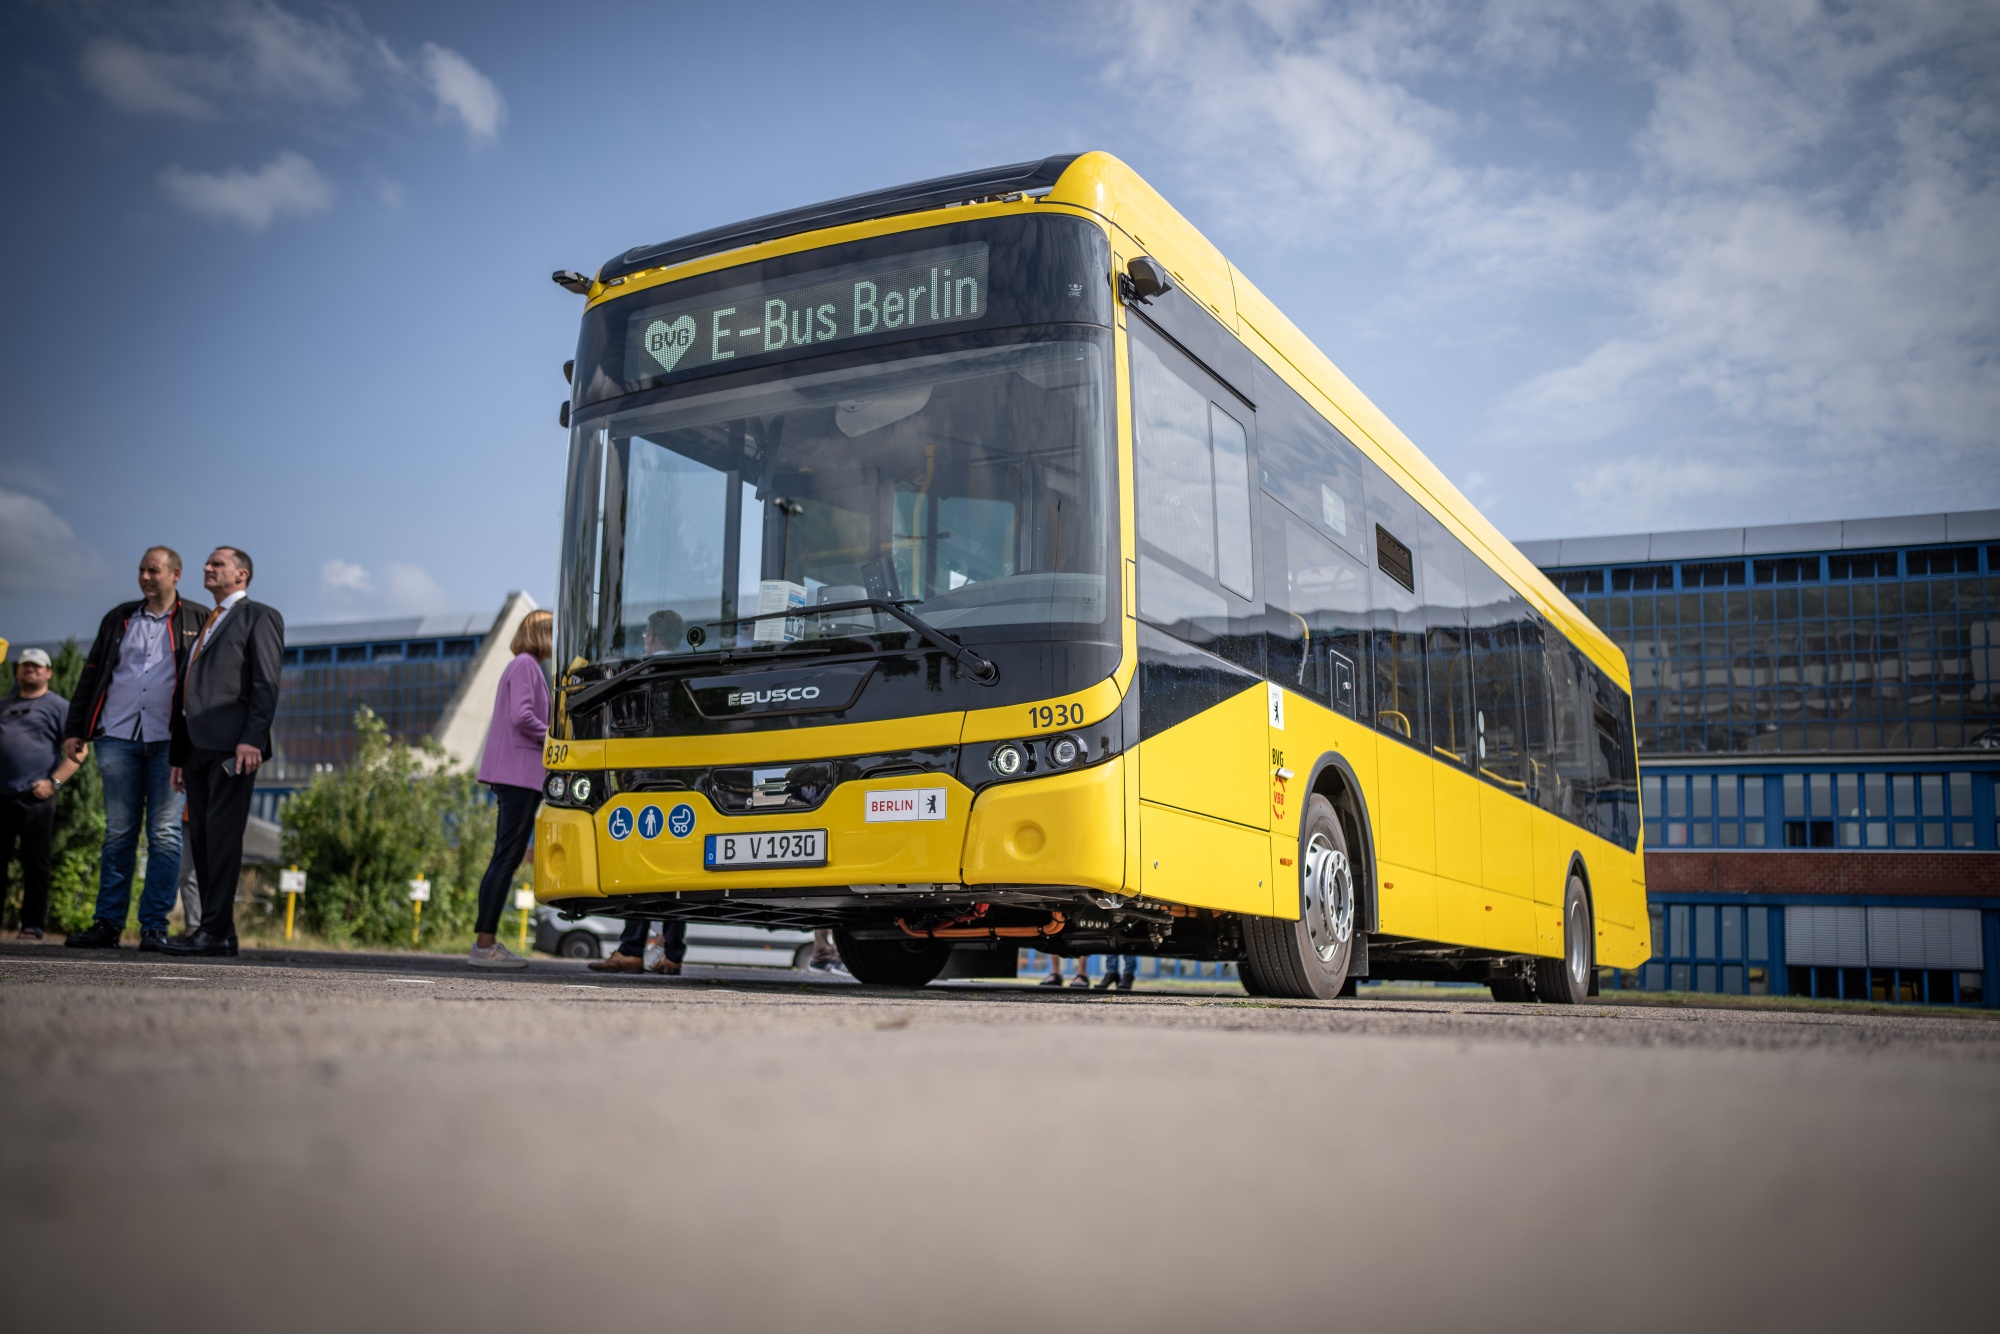 To Combat Carbon, Berlin Bets on Battery-Powered Buses - Bloomberg